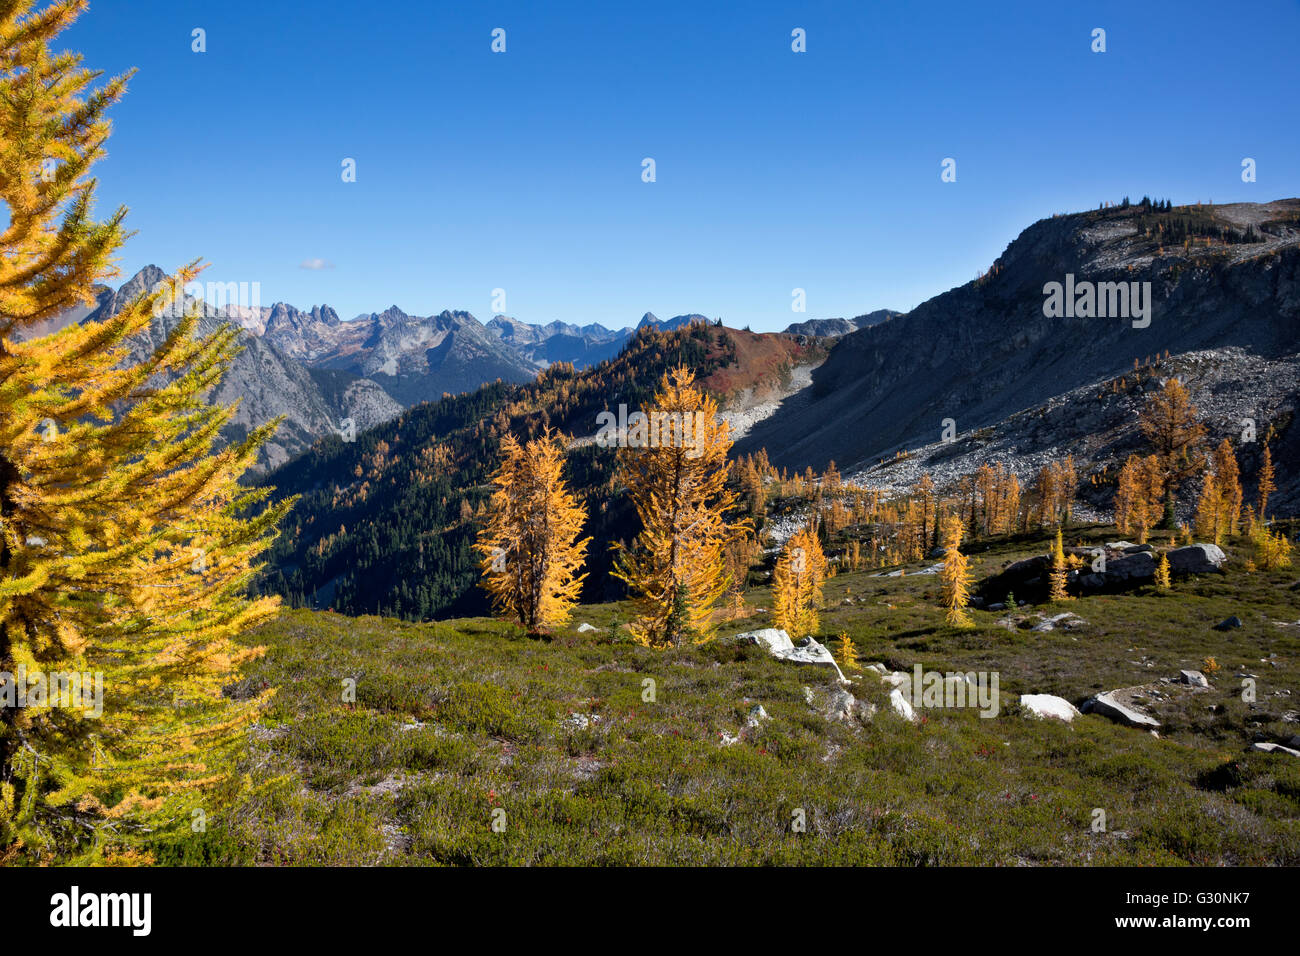 WASHINGTON - Larch trees in autumn colors in the Okanogan-Wenatchee National Forest below Maple Pass in the North Cascades. Stock Photo